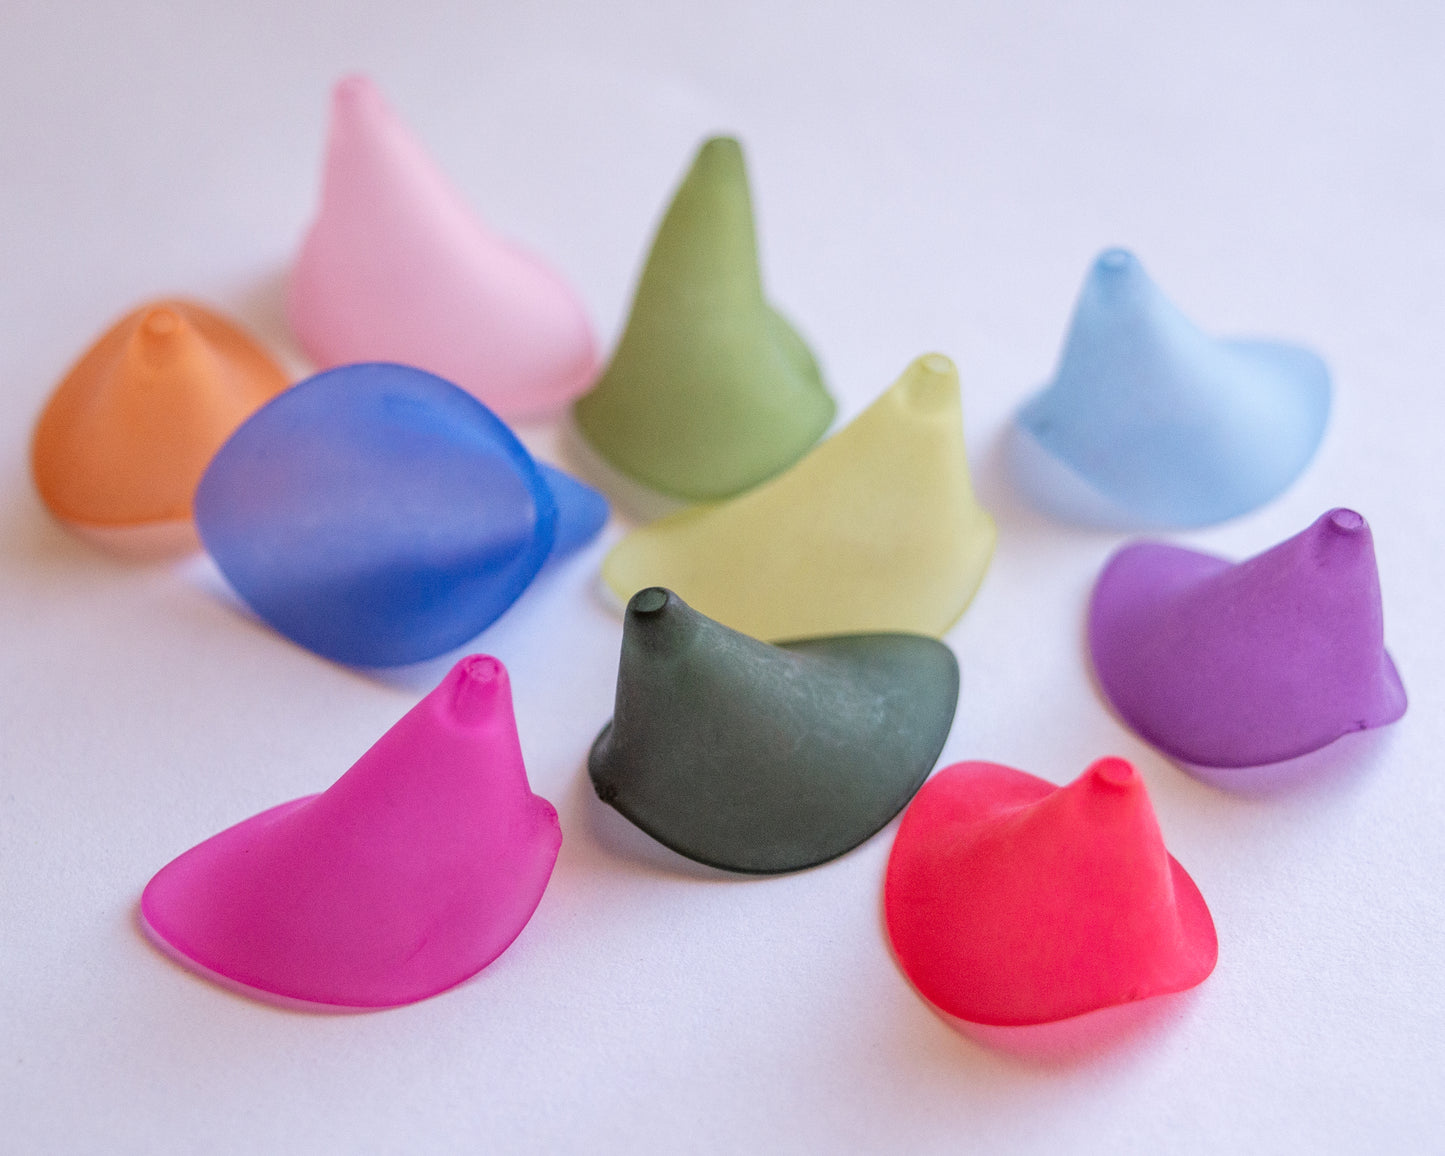 20x25mm Calla Lily Beads in Colorful Frosted Acrylic